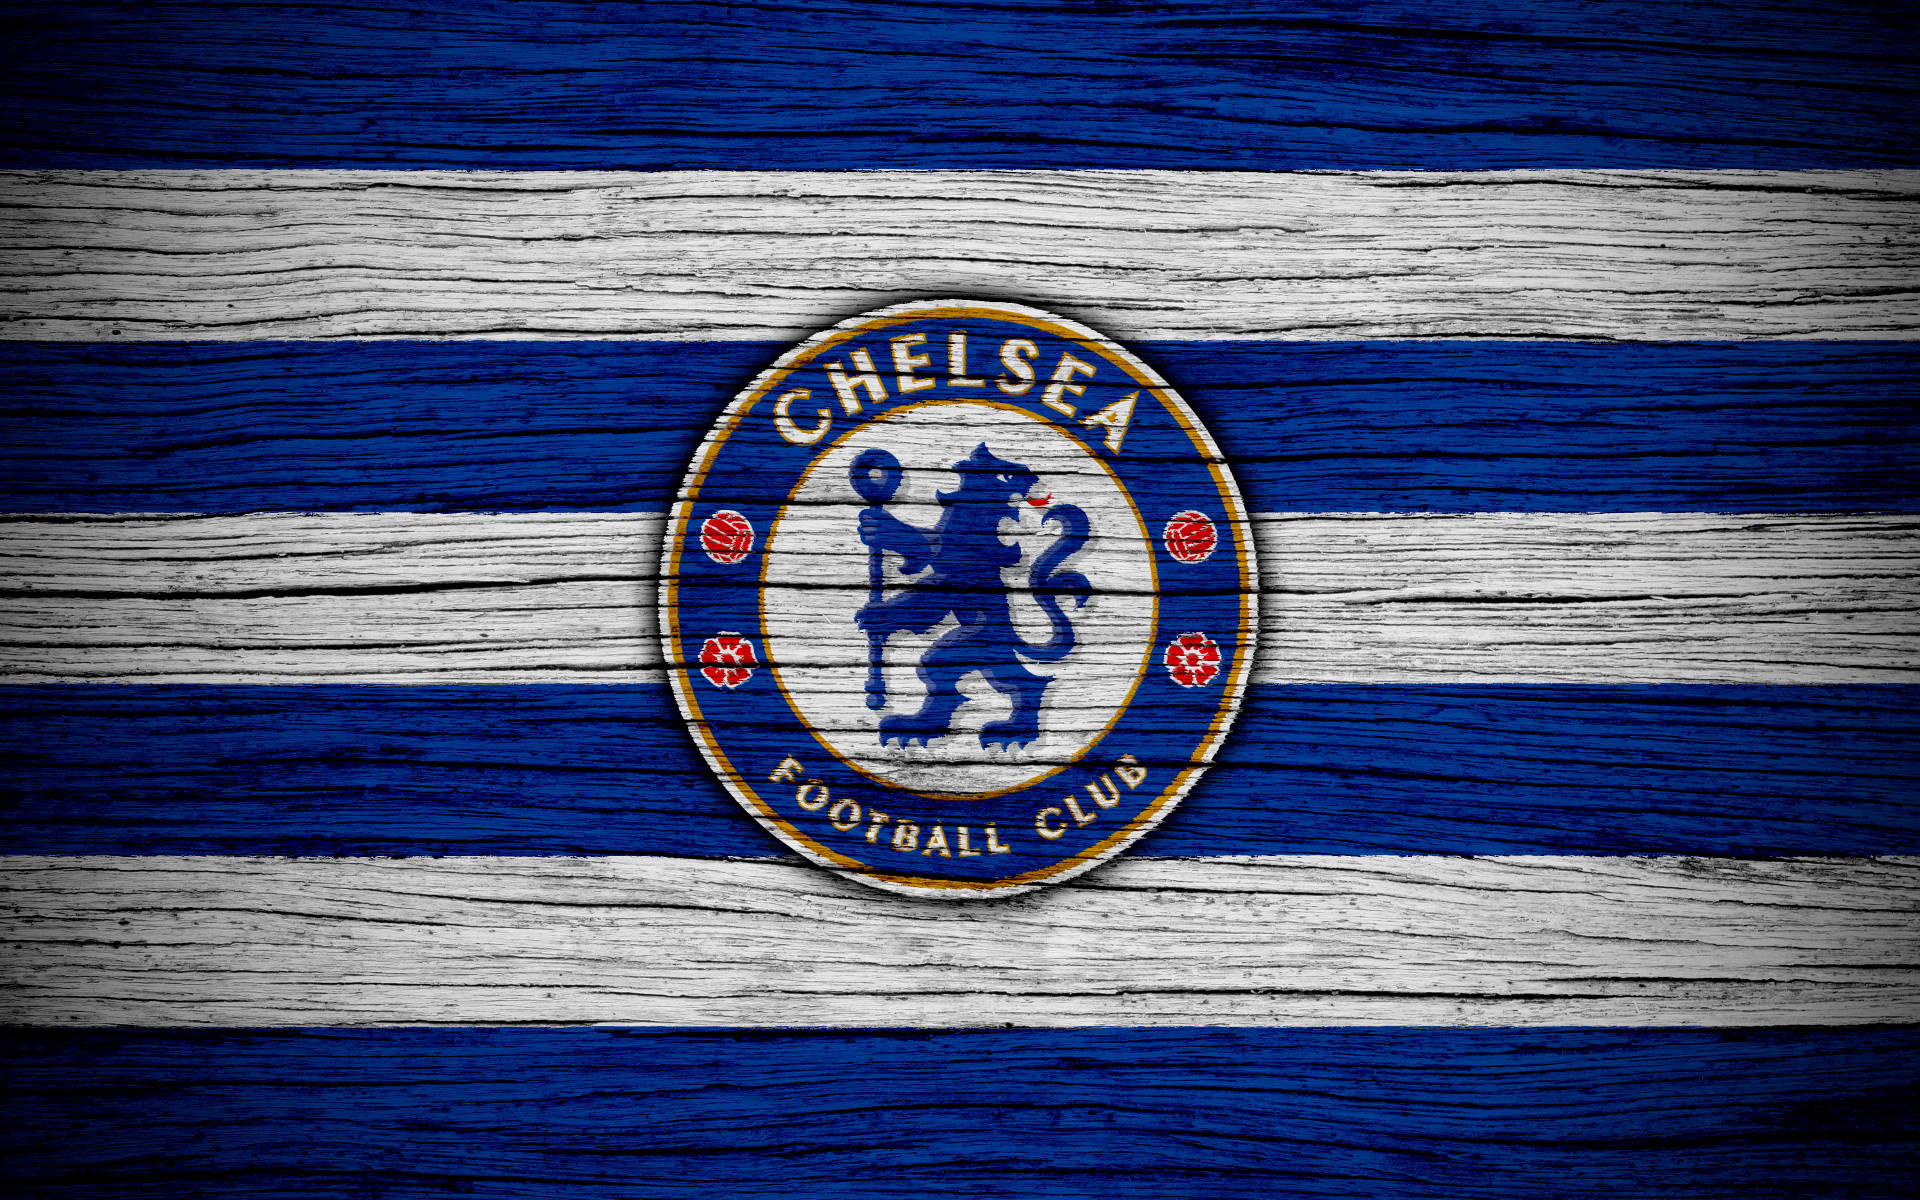 Chelsea FC In Blue And White Wallpaper